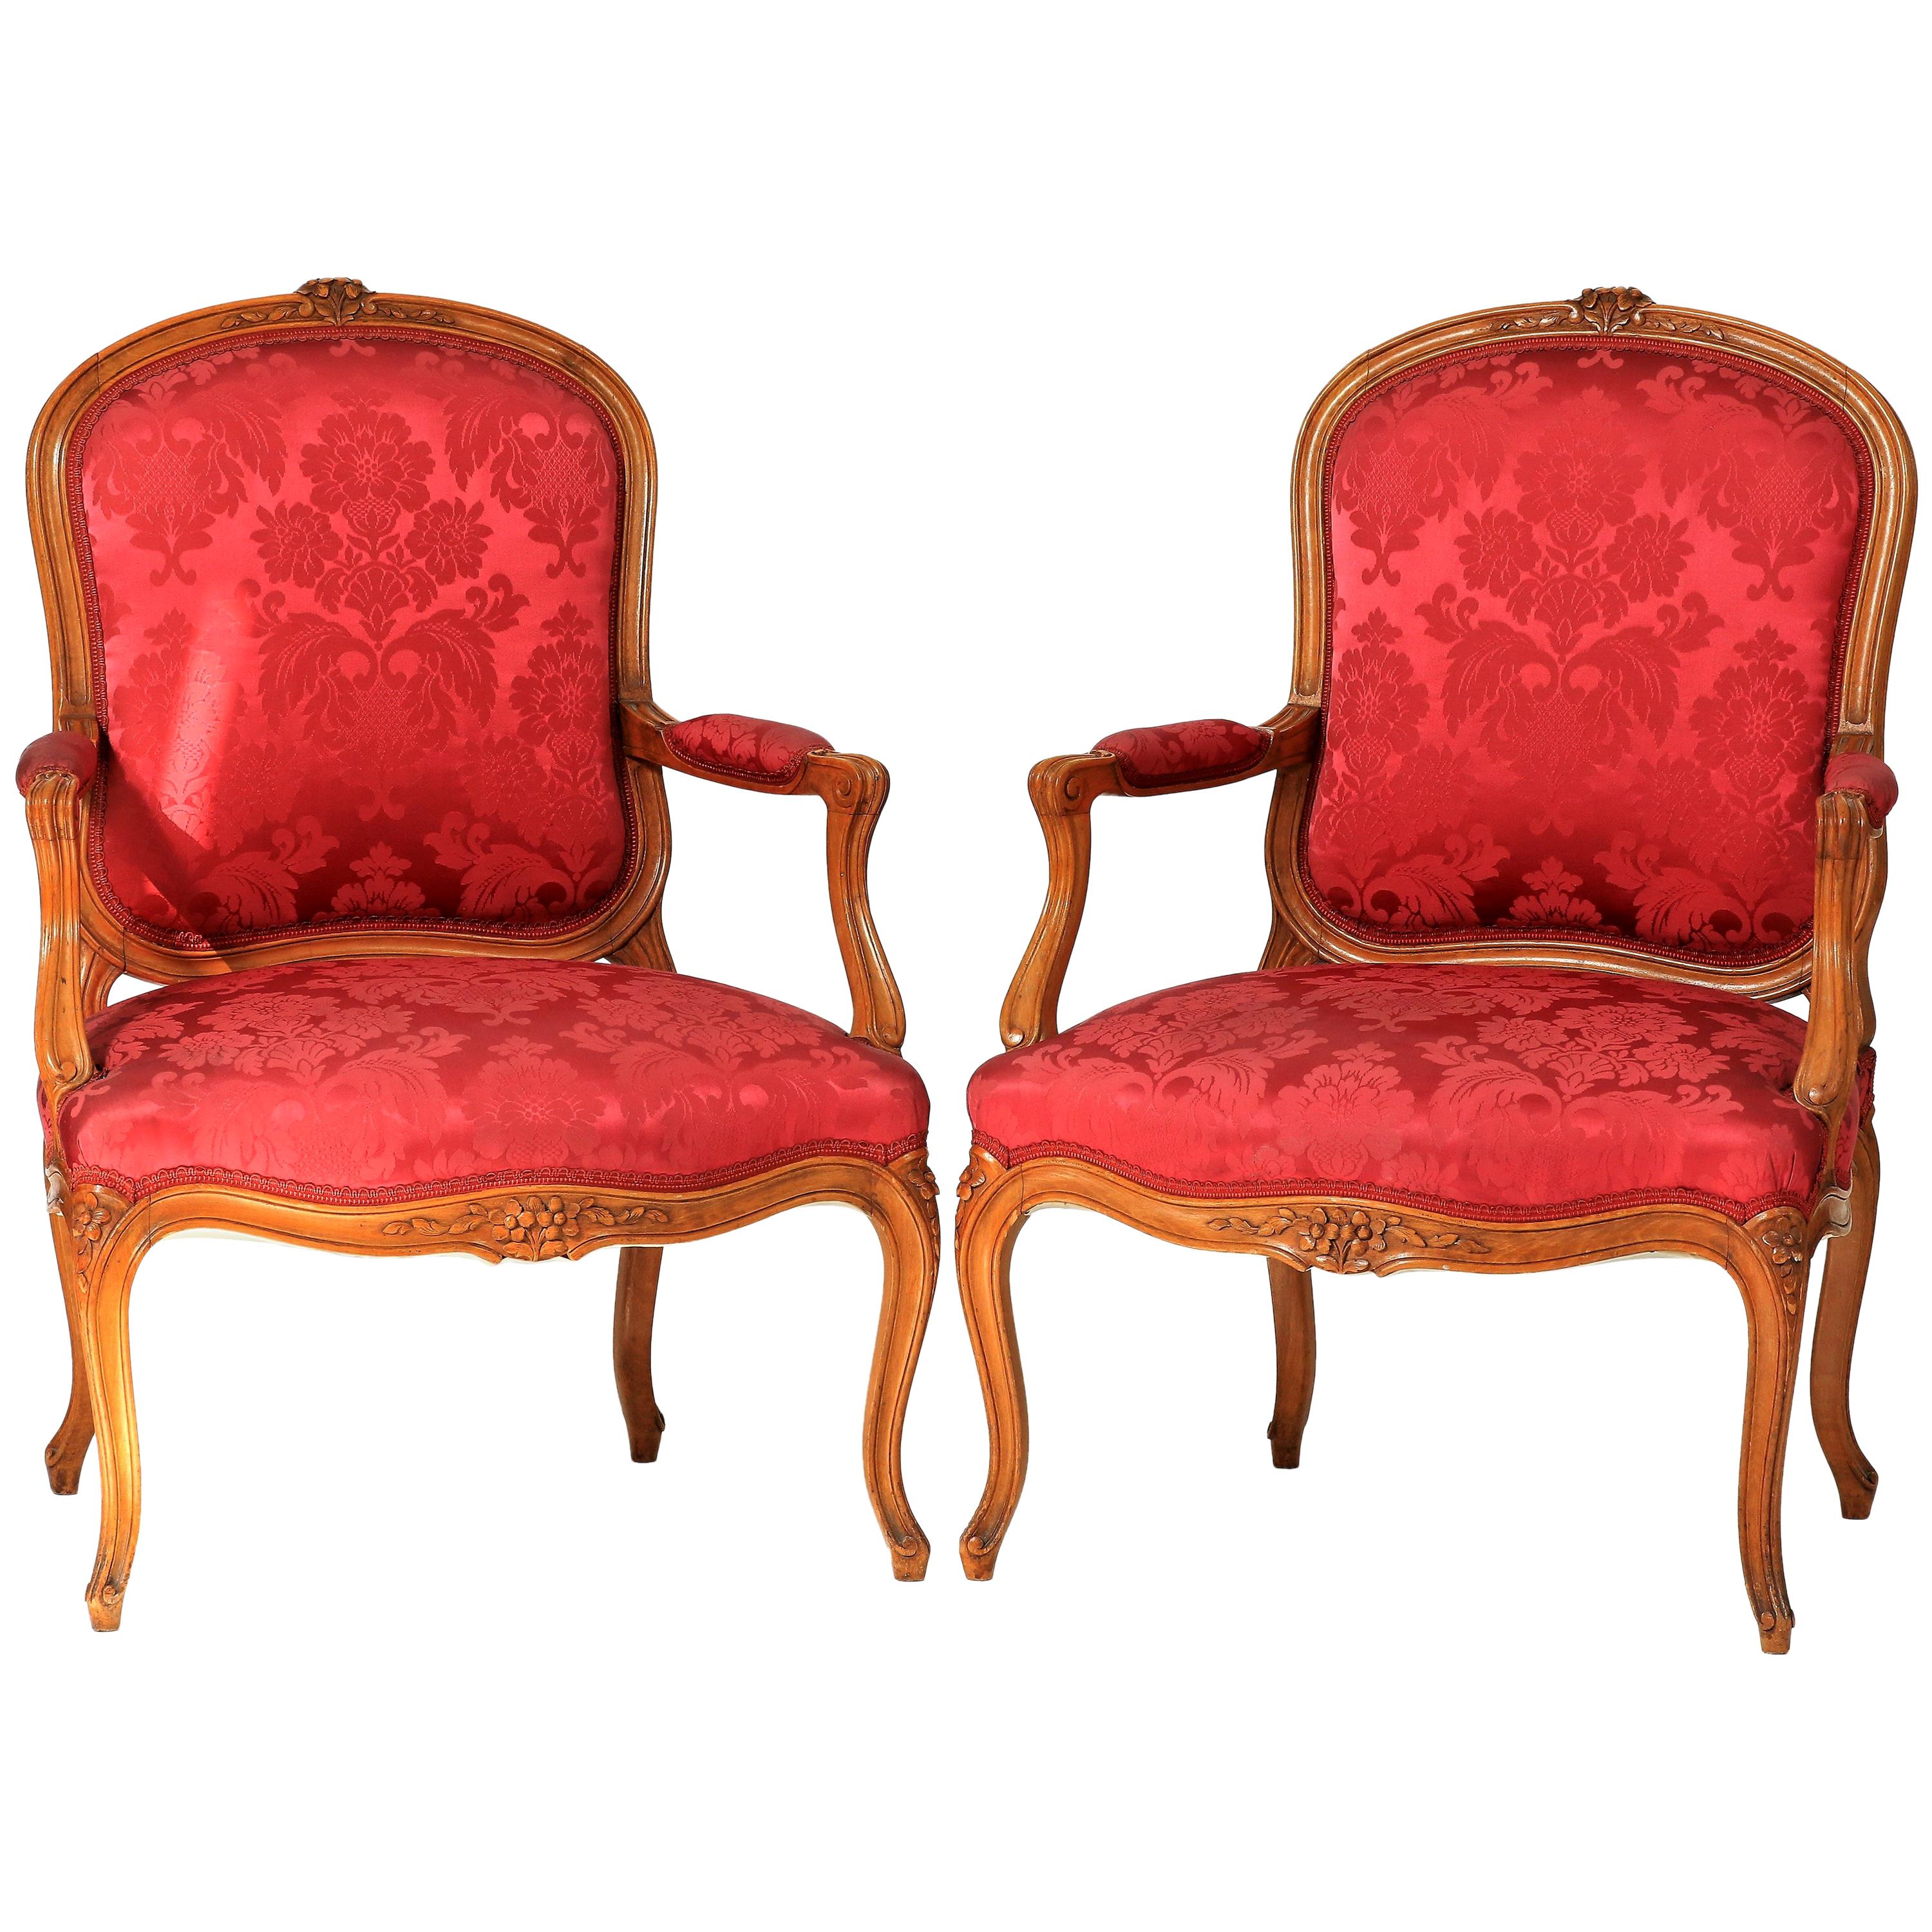 Pair of Louis XV Style "Cabriolet" Armchair, 19th Century